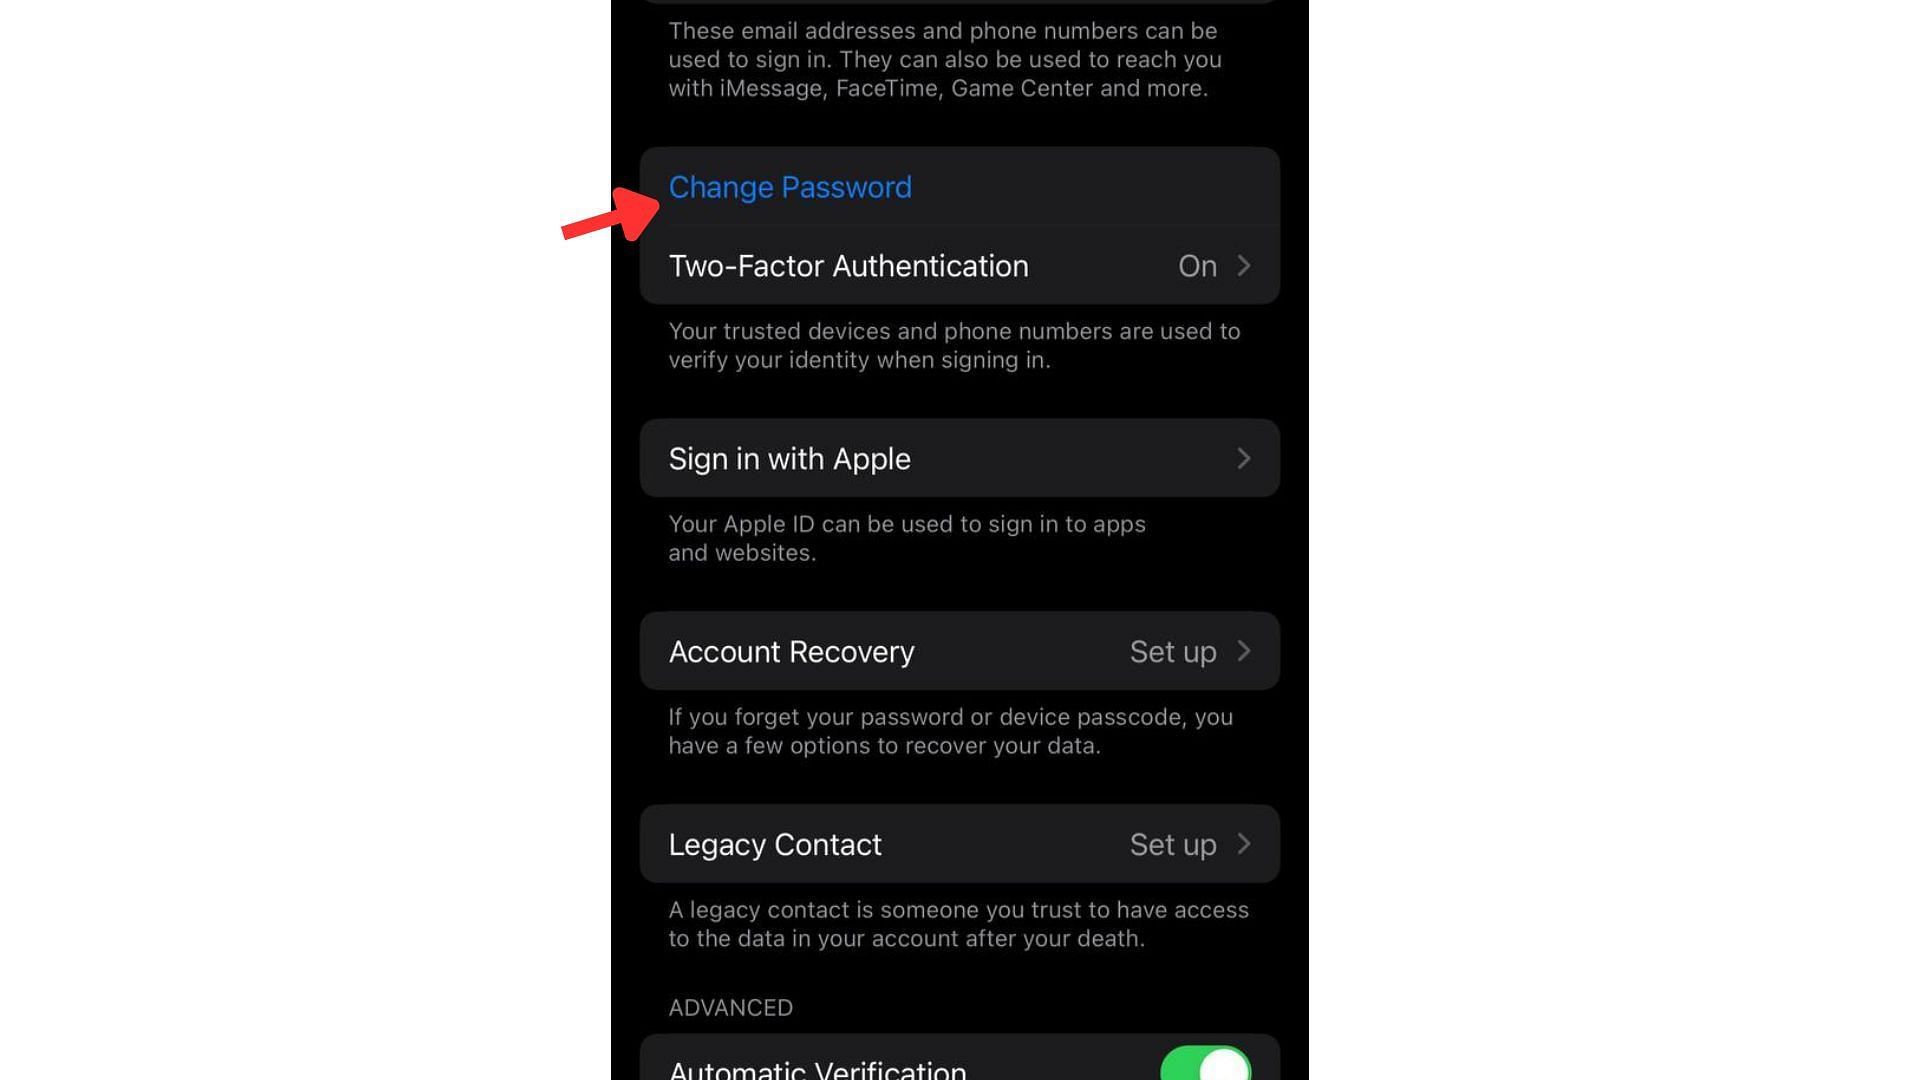 Change password on trusted device (Image via Apple)